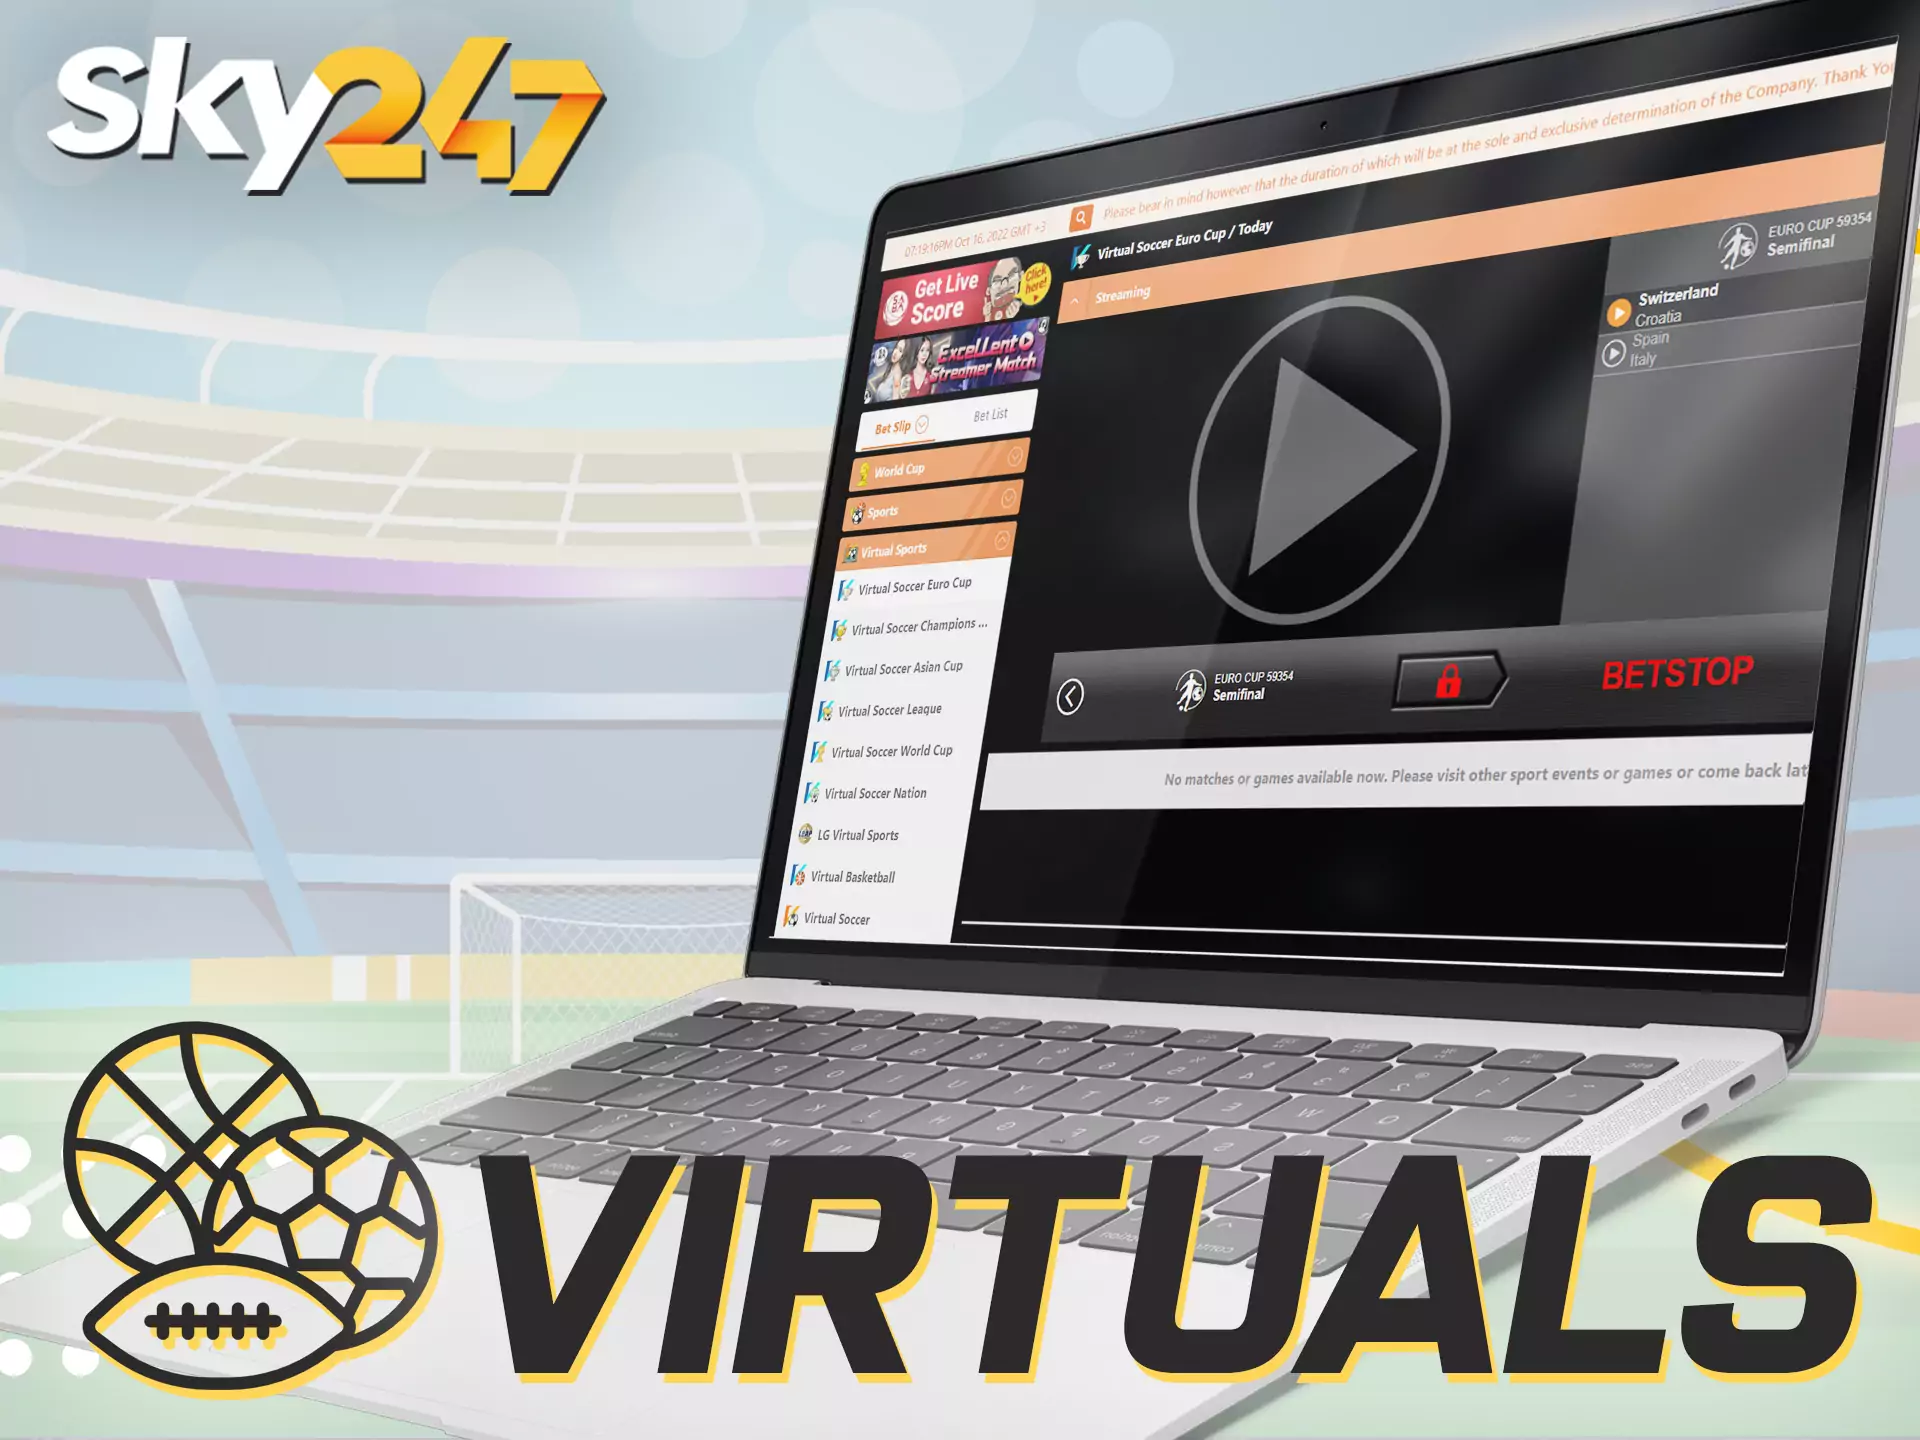 Virtual betting is also presented on Sky247.